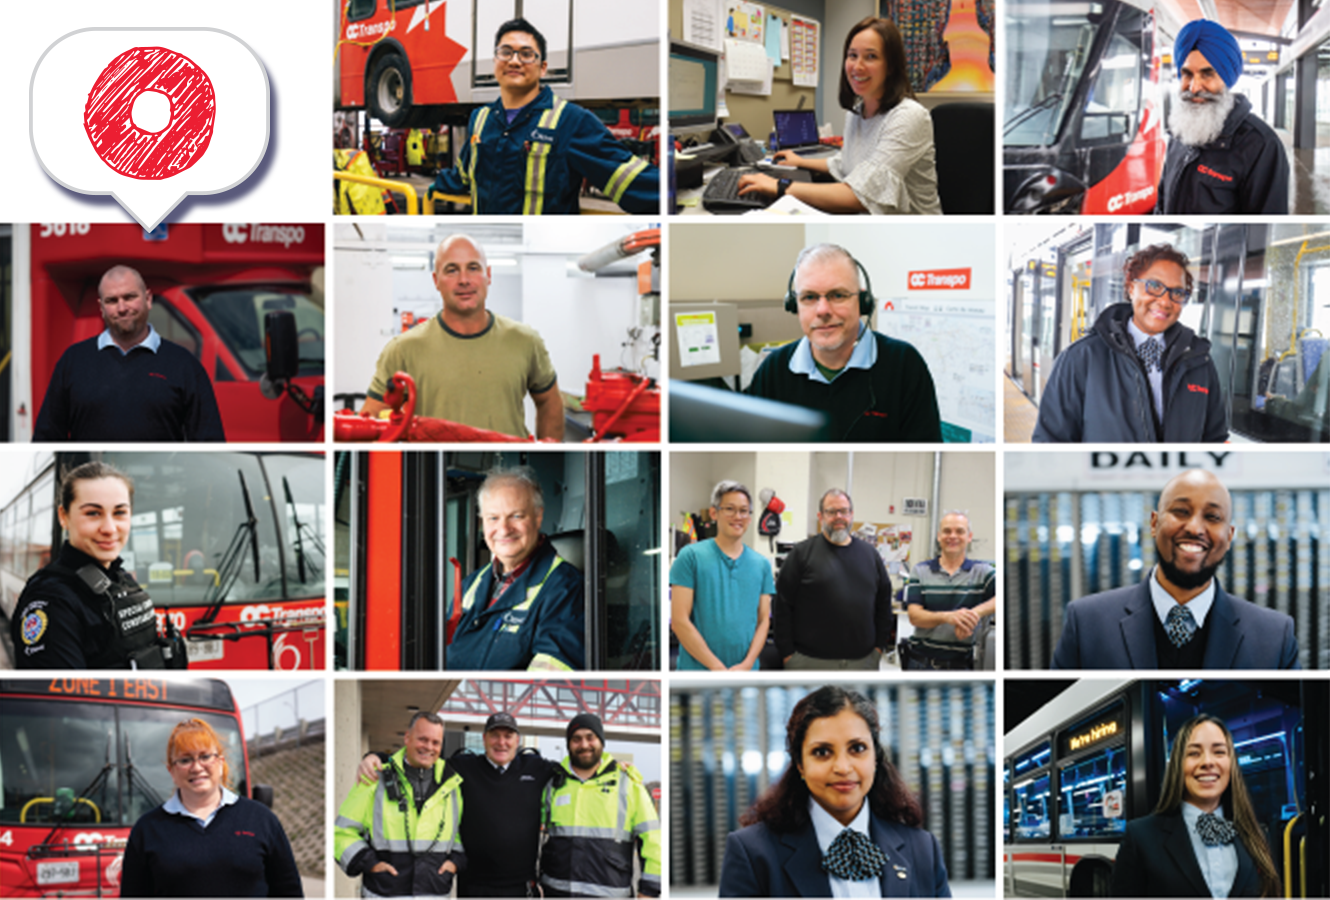 Image - Celebrate transit operators and workers on March 18